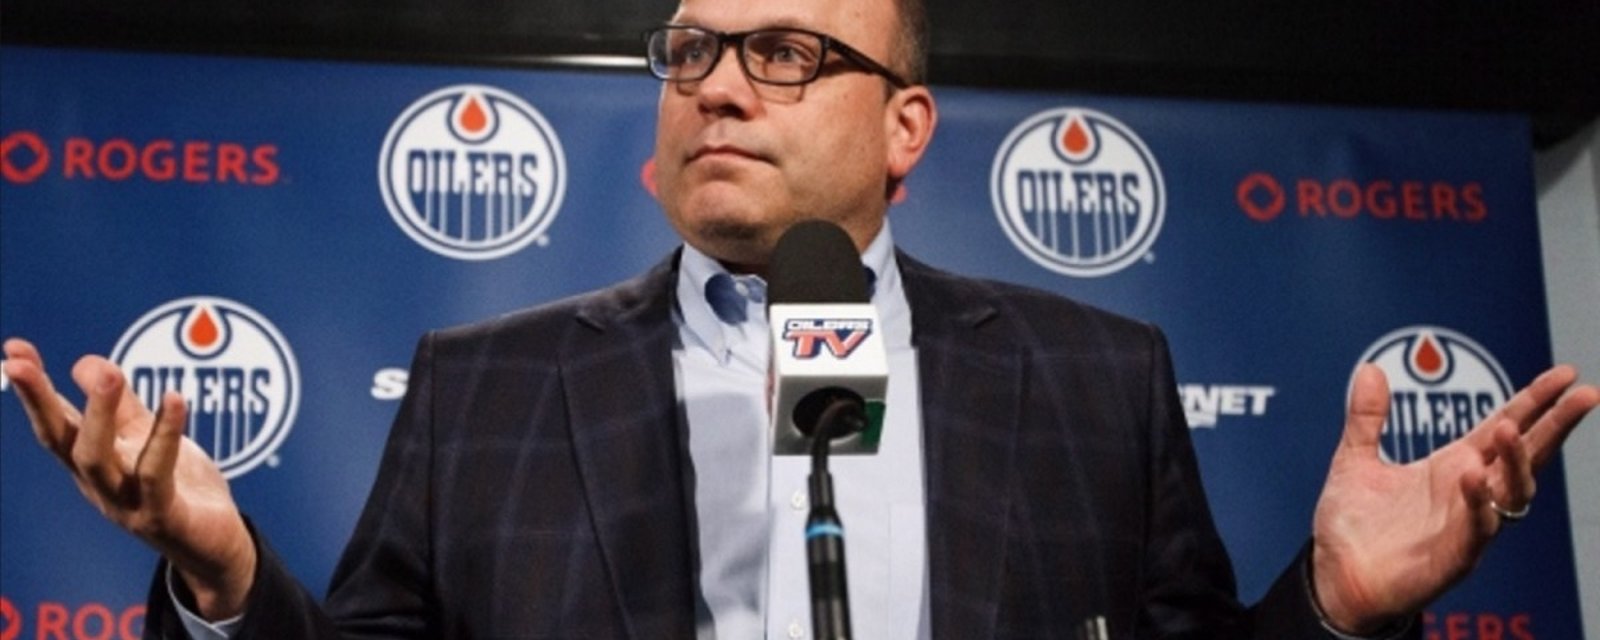 Chiarelli speaks for the first time after tons of criticism from fans. 